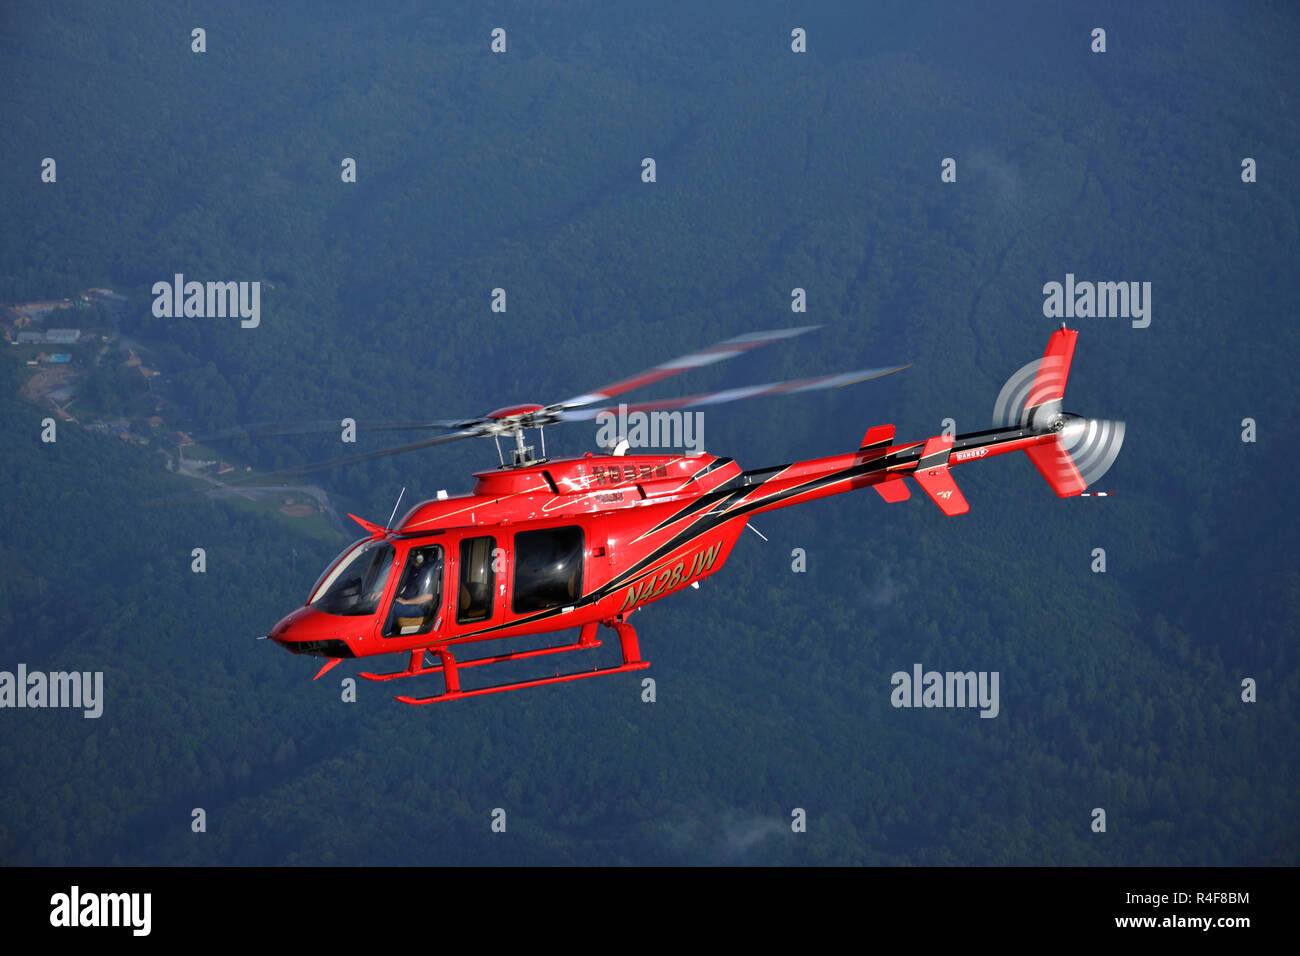 Bell 407 Civilian Helicopter Stock Photo - Alamy